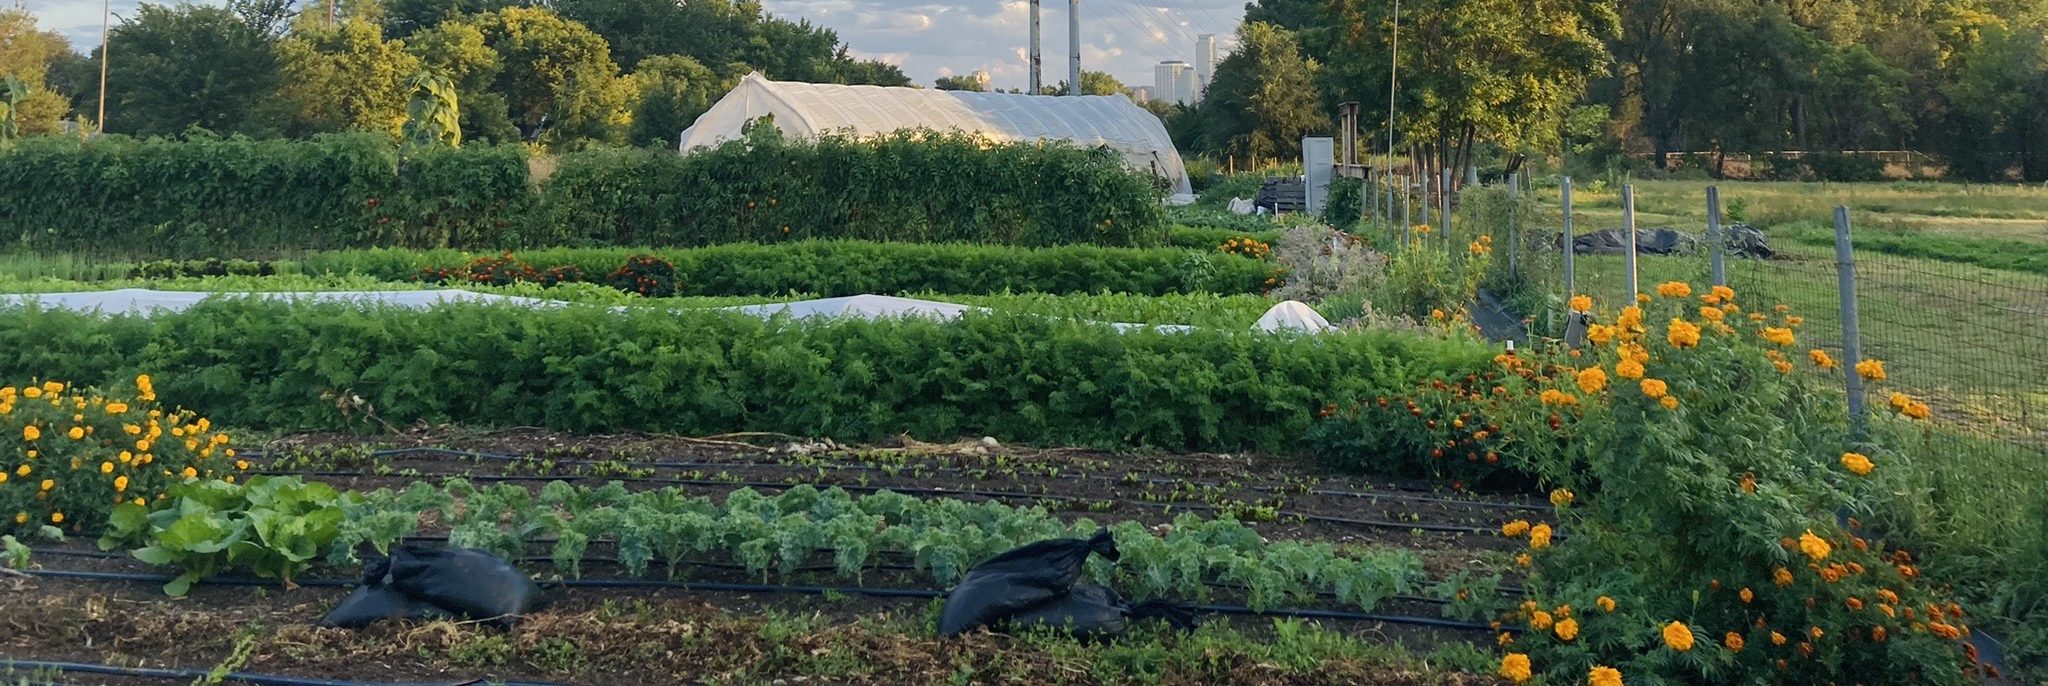 Photo of the California Street Farm in early summer, Header photo by Cory Eull. Used with permission.